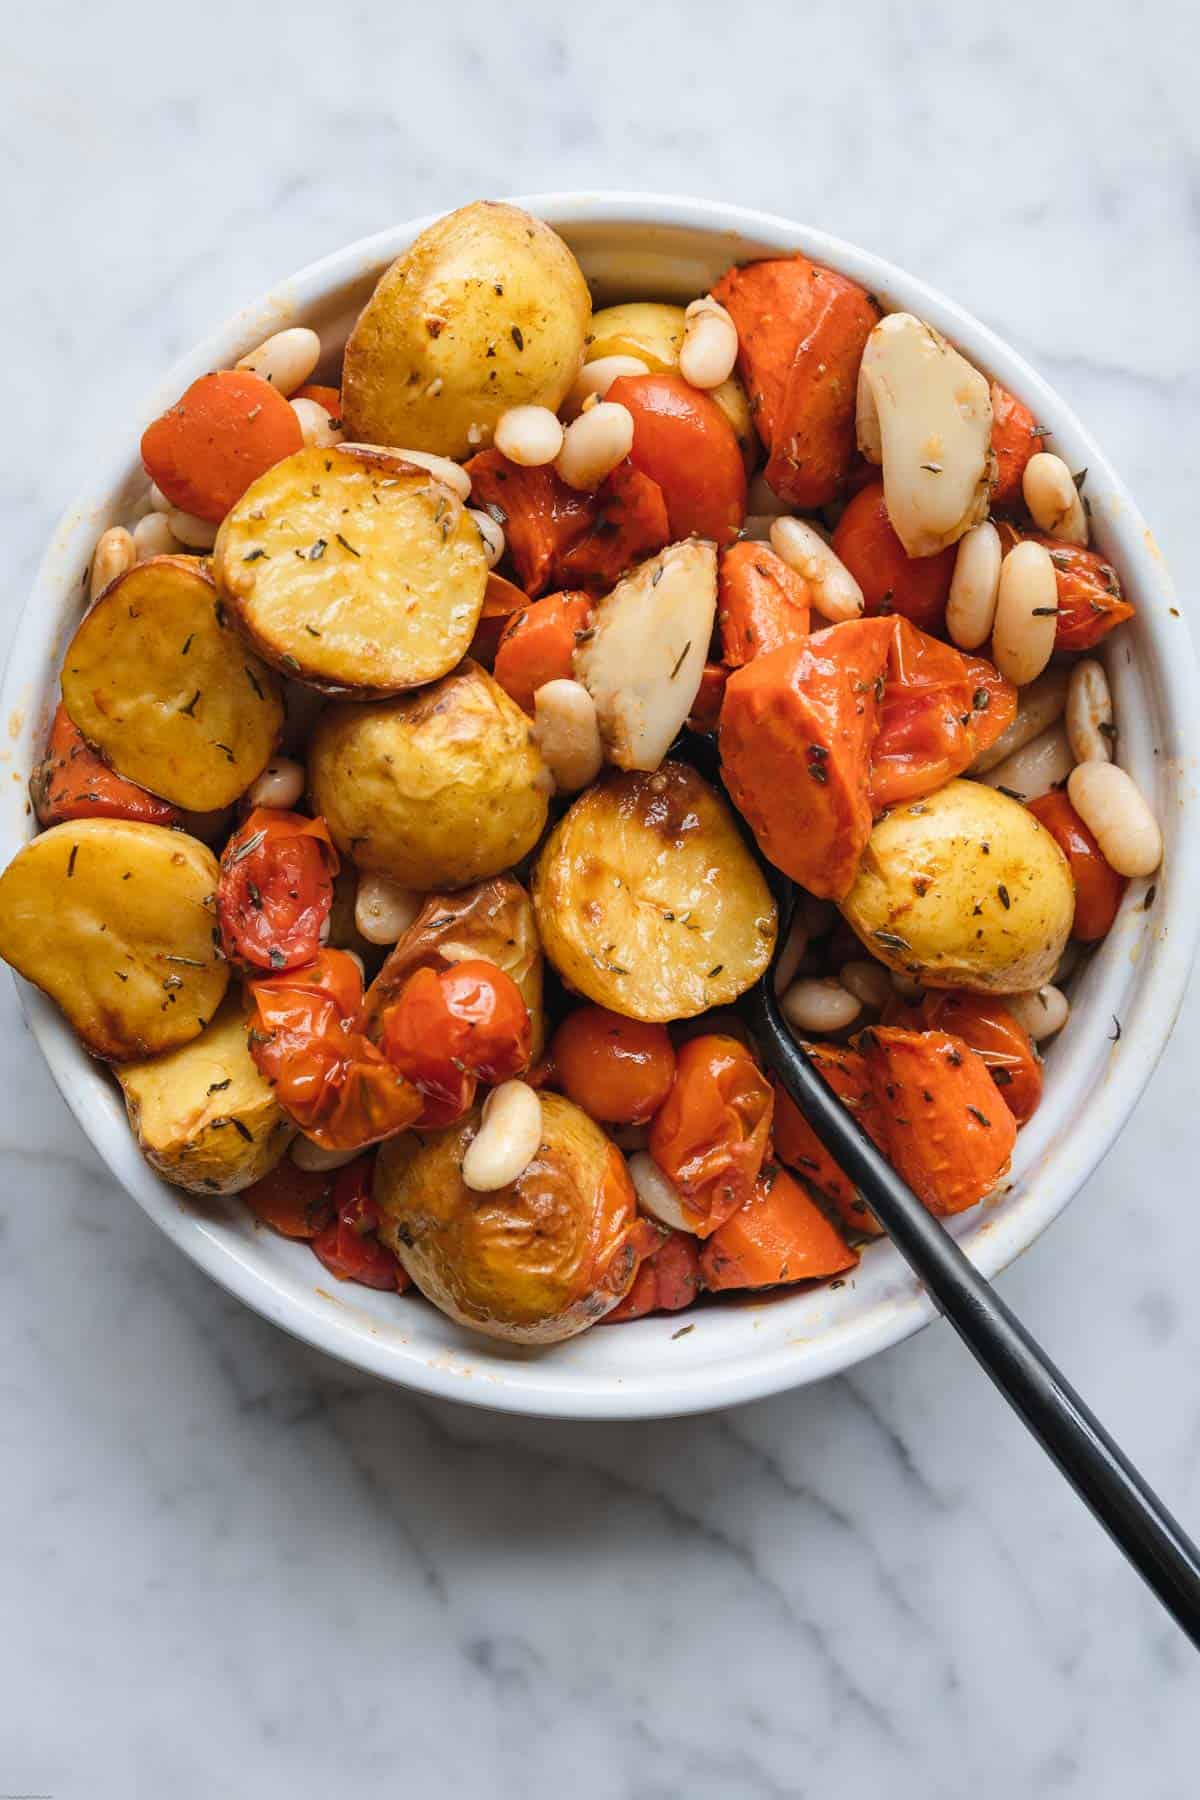 Roast potatoes, carrots, grape tomatoes, garlic, and white beans tossed with olive oil and fresh herbs.